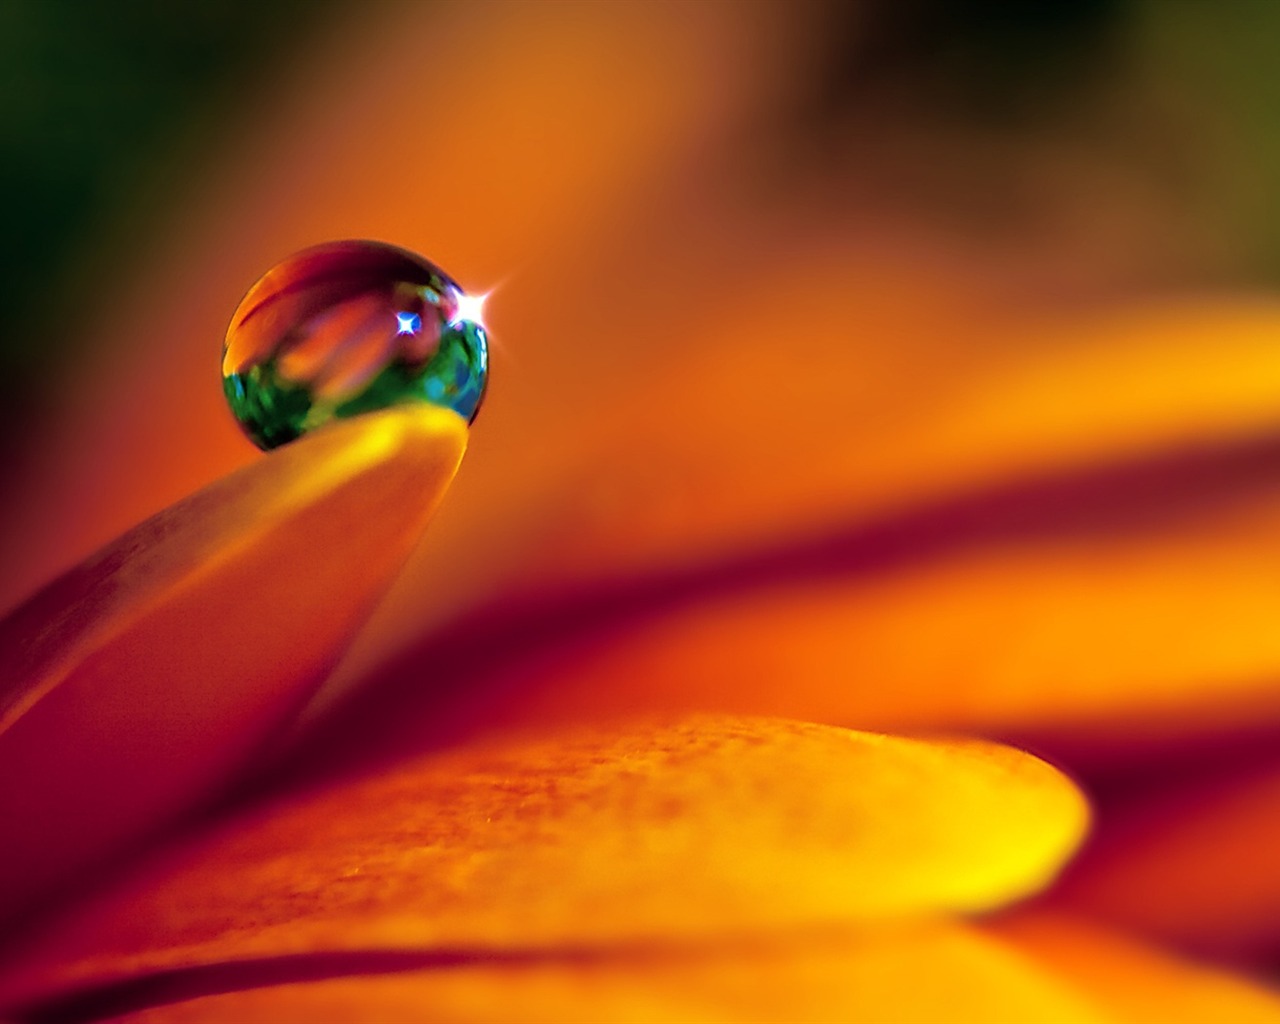 HD wallpaper flowers and drops of water #1 - 1280x1024